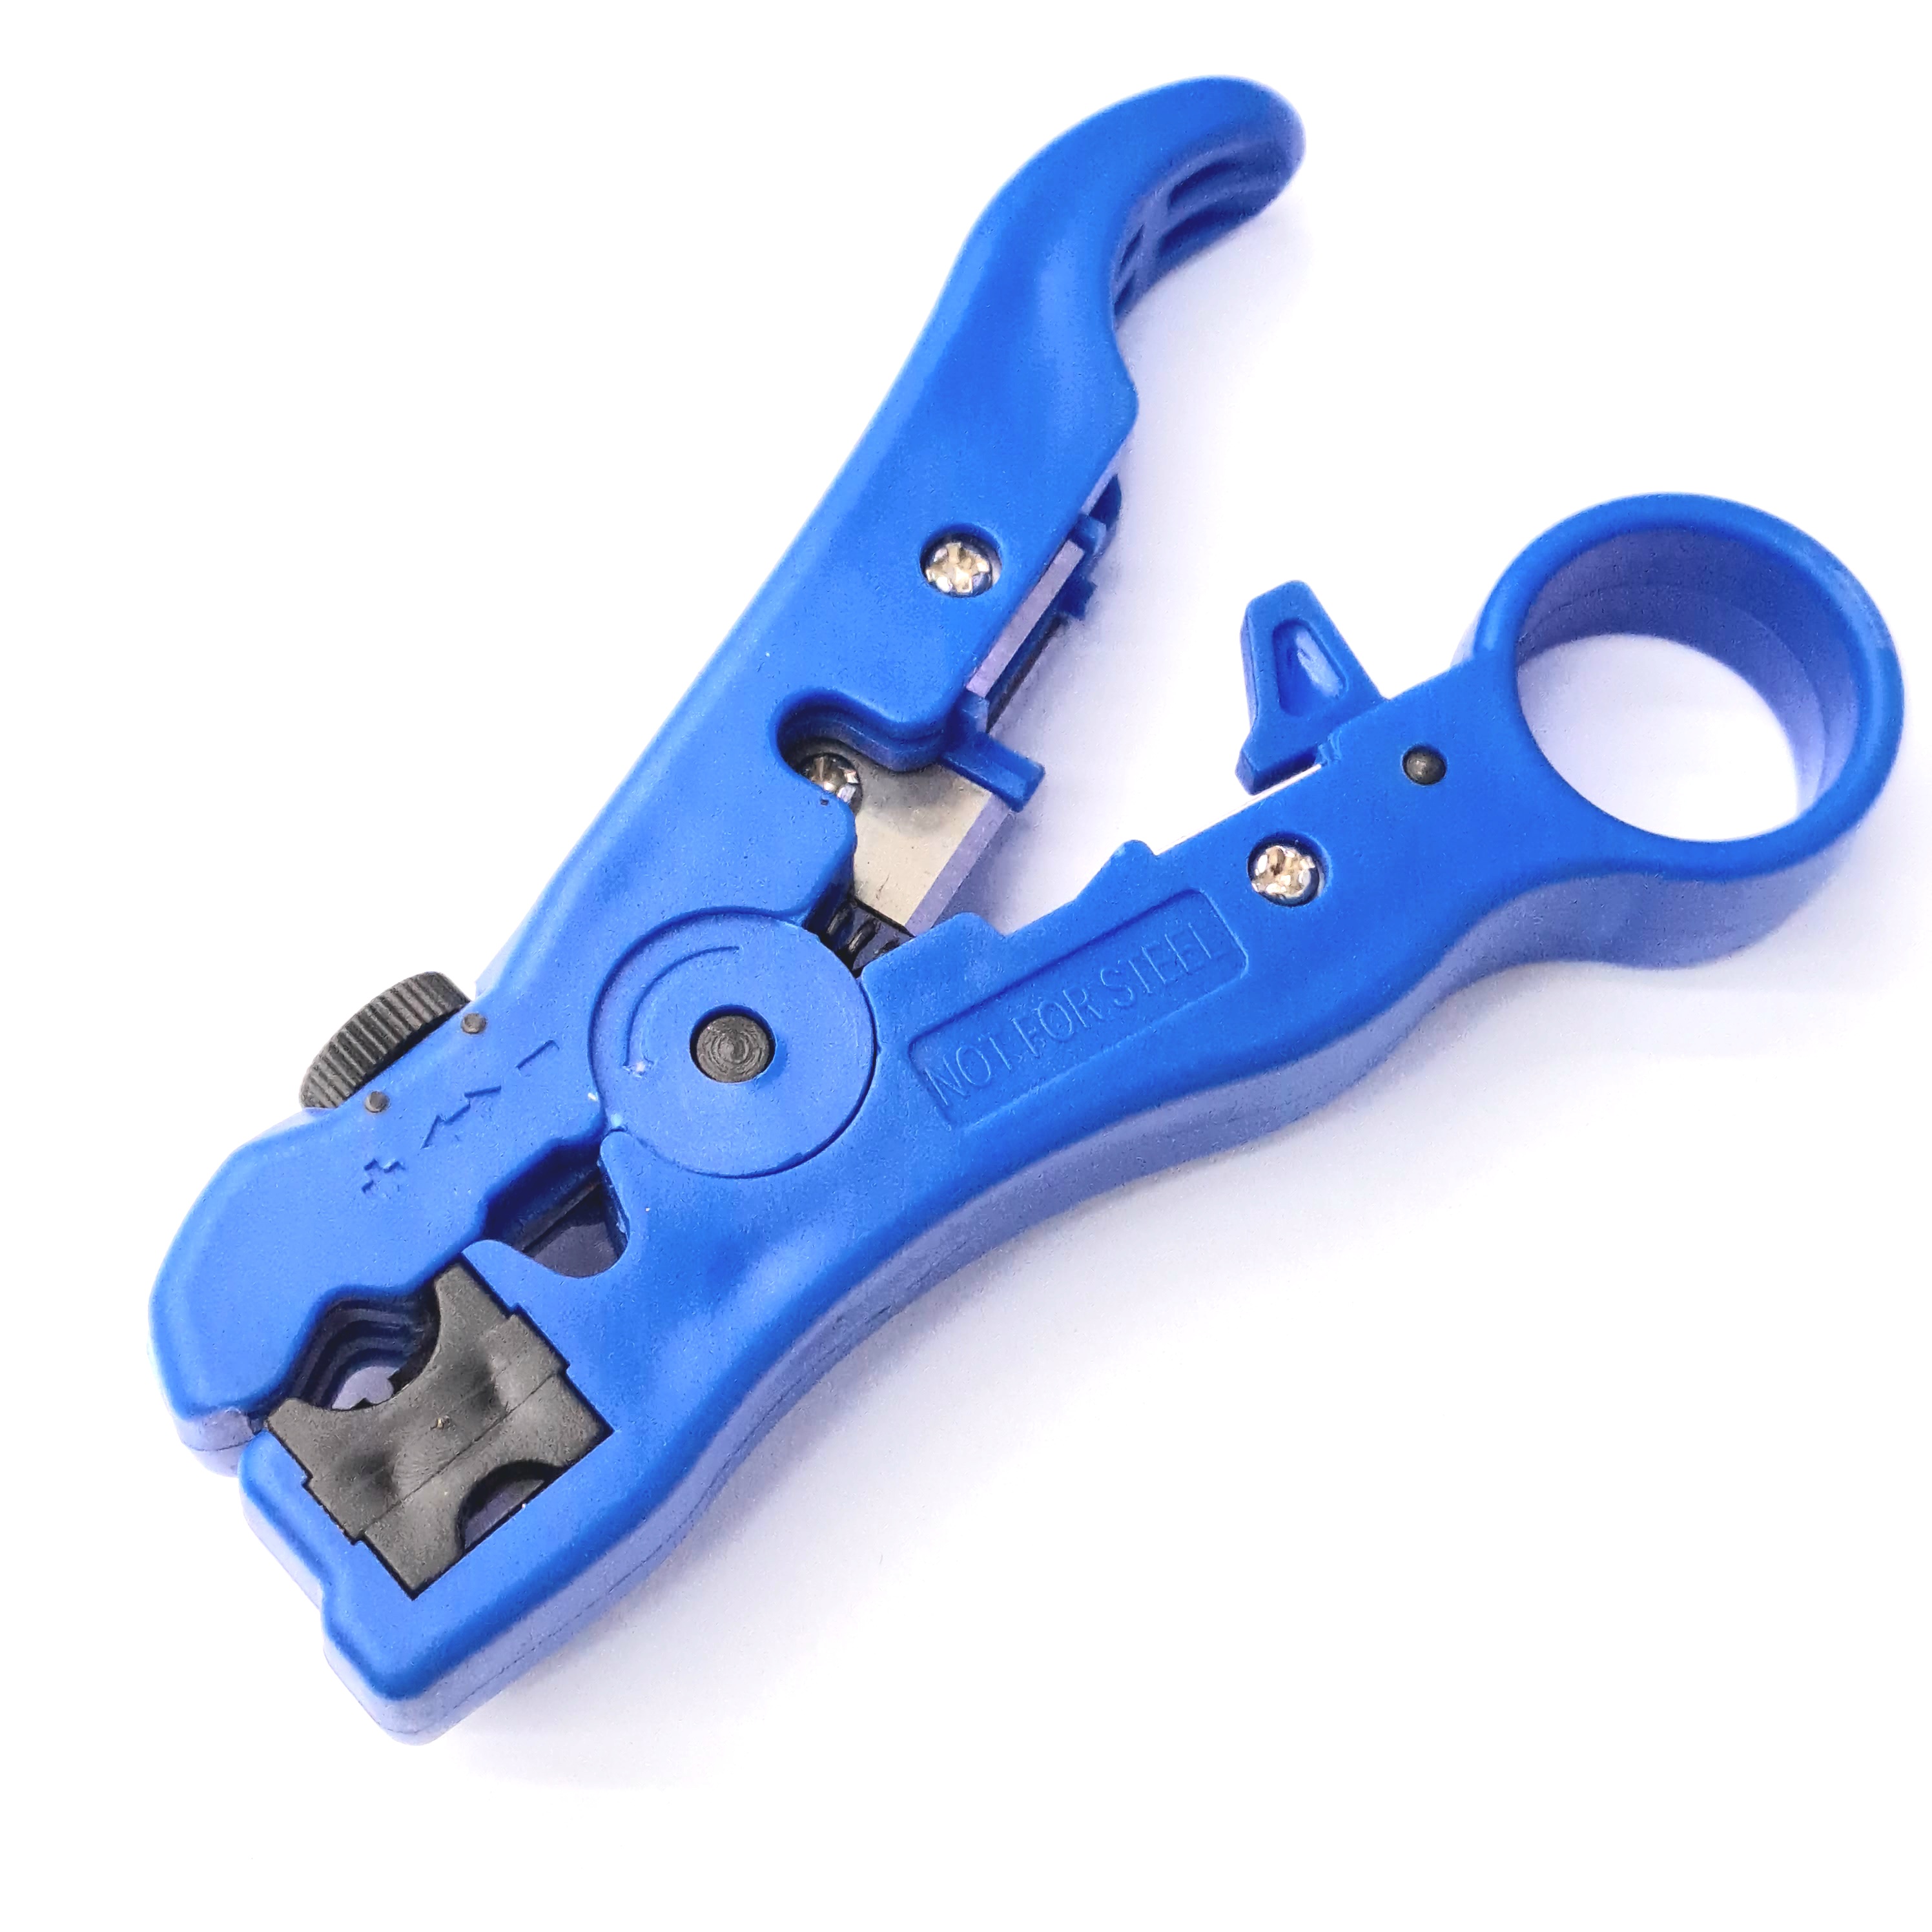 Coaxial Stripper 352 for RG59/6/7/11